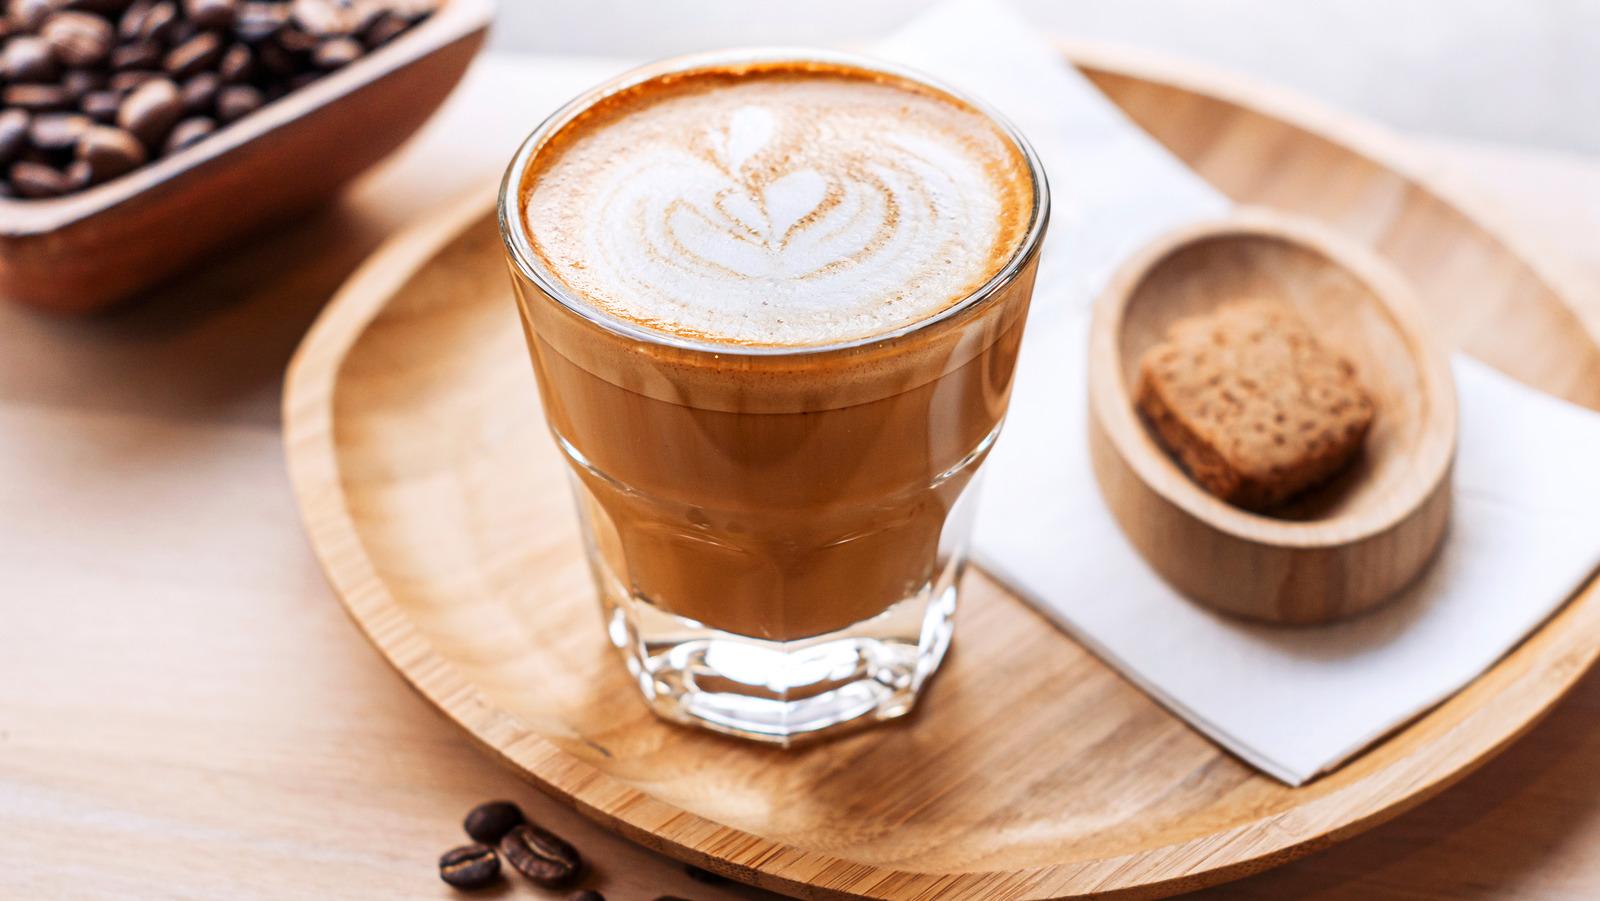 Cortado: Overview, Steps to Make It, and How to Order It at